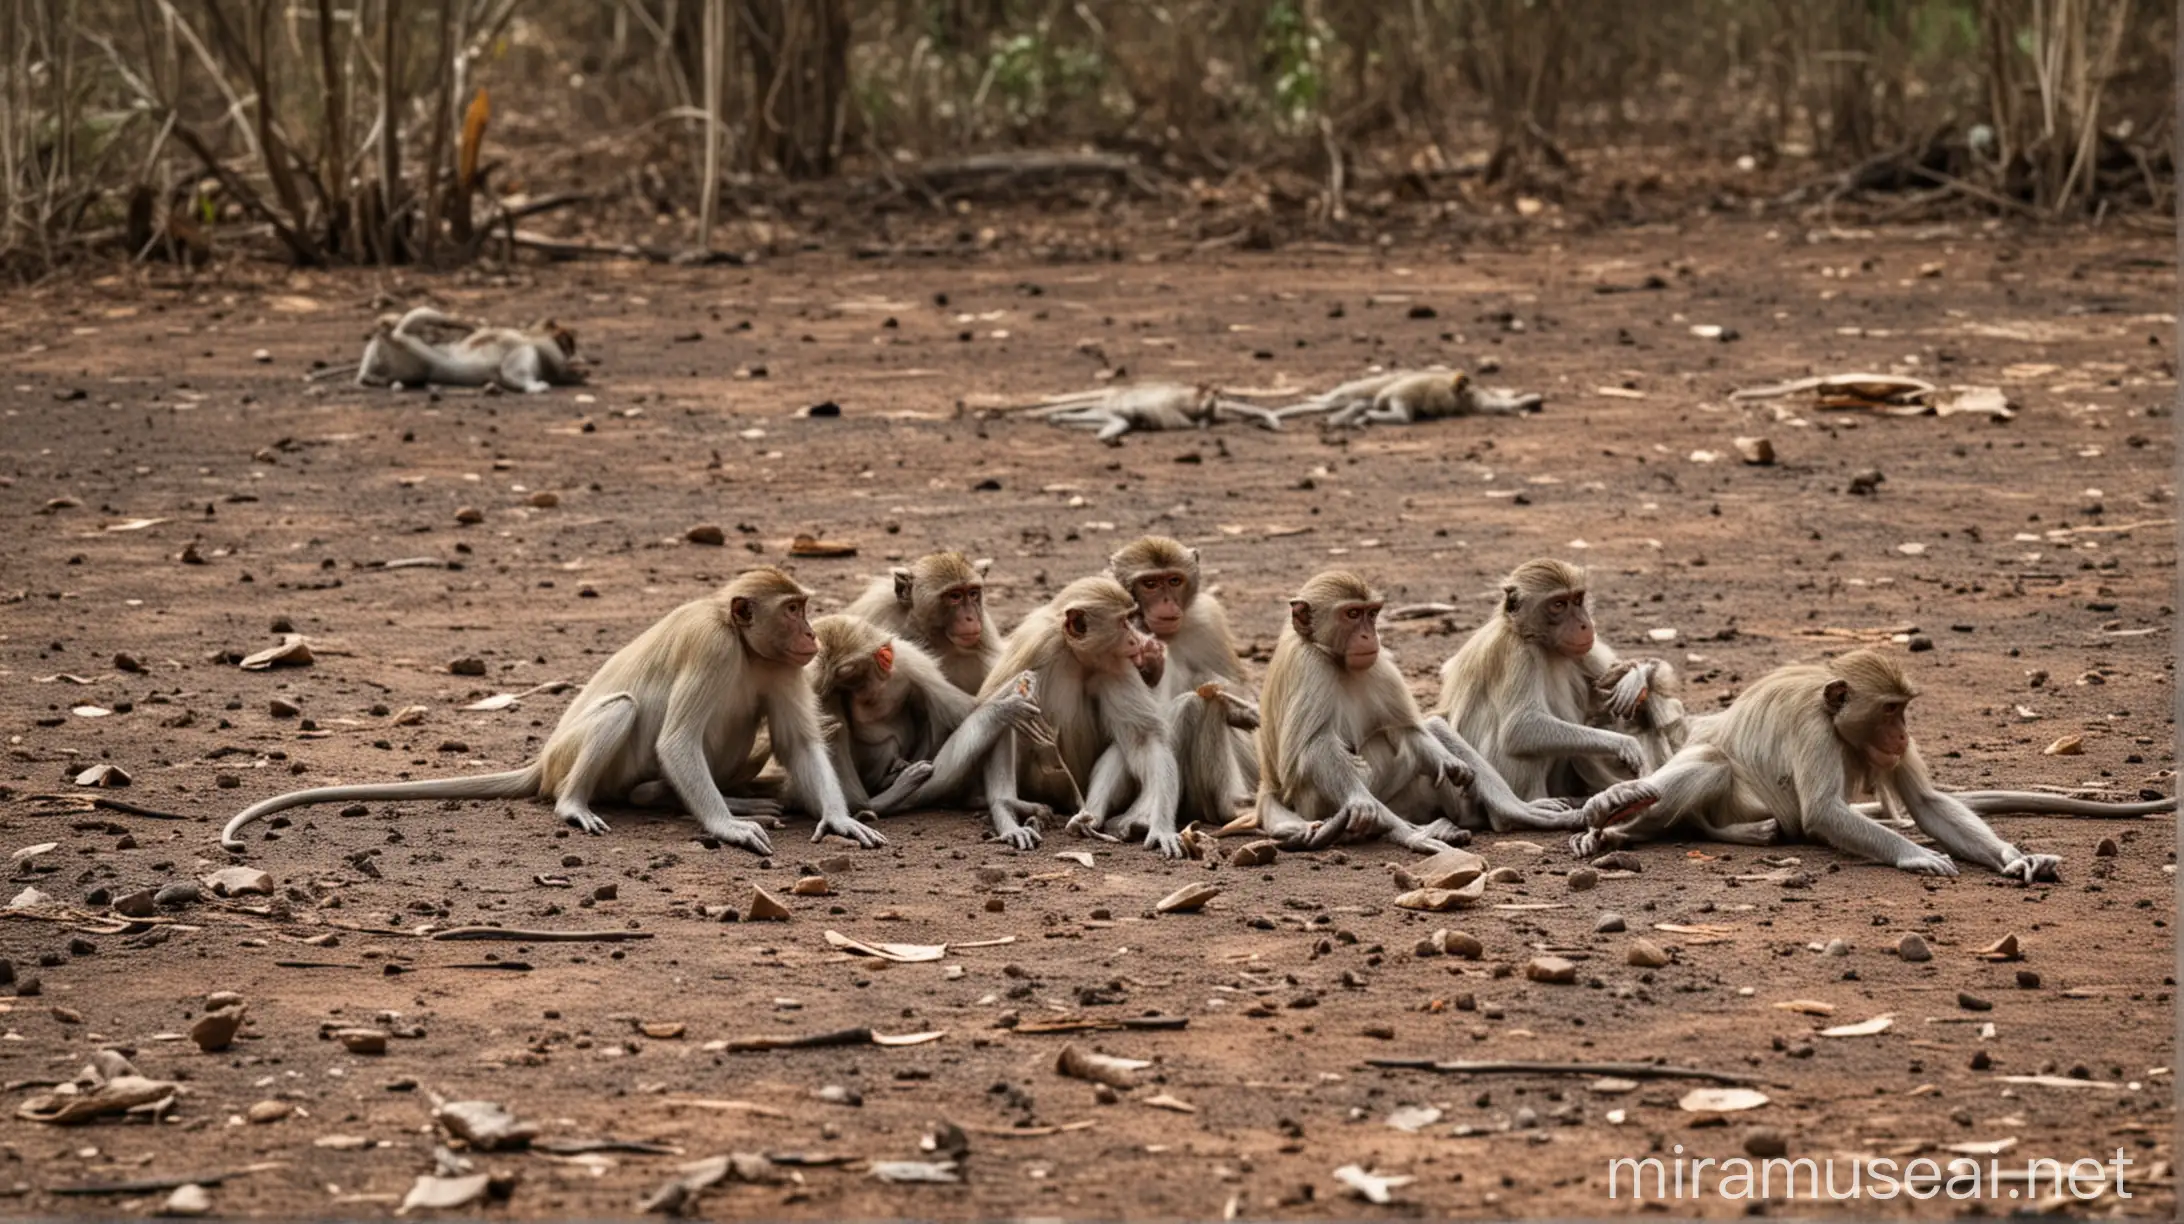 Five Dead Monkeys by a Dry Forest Pond